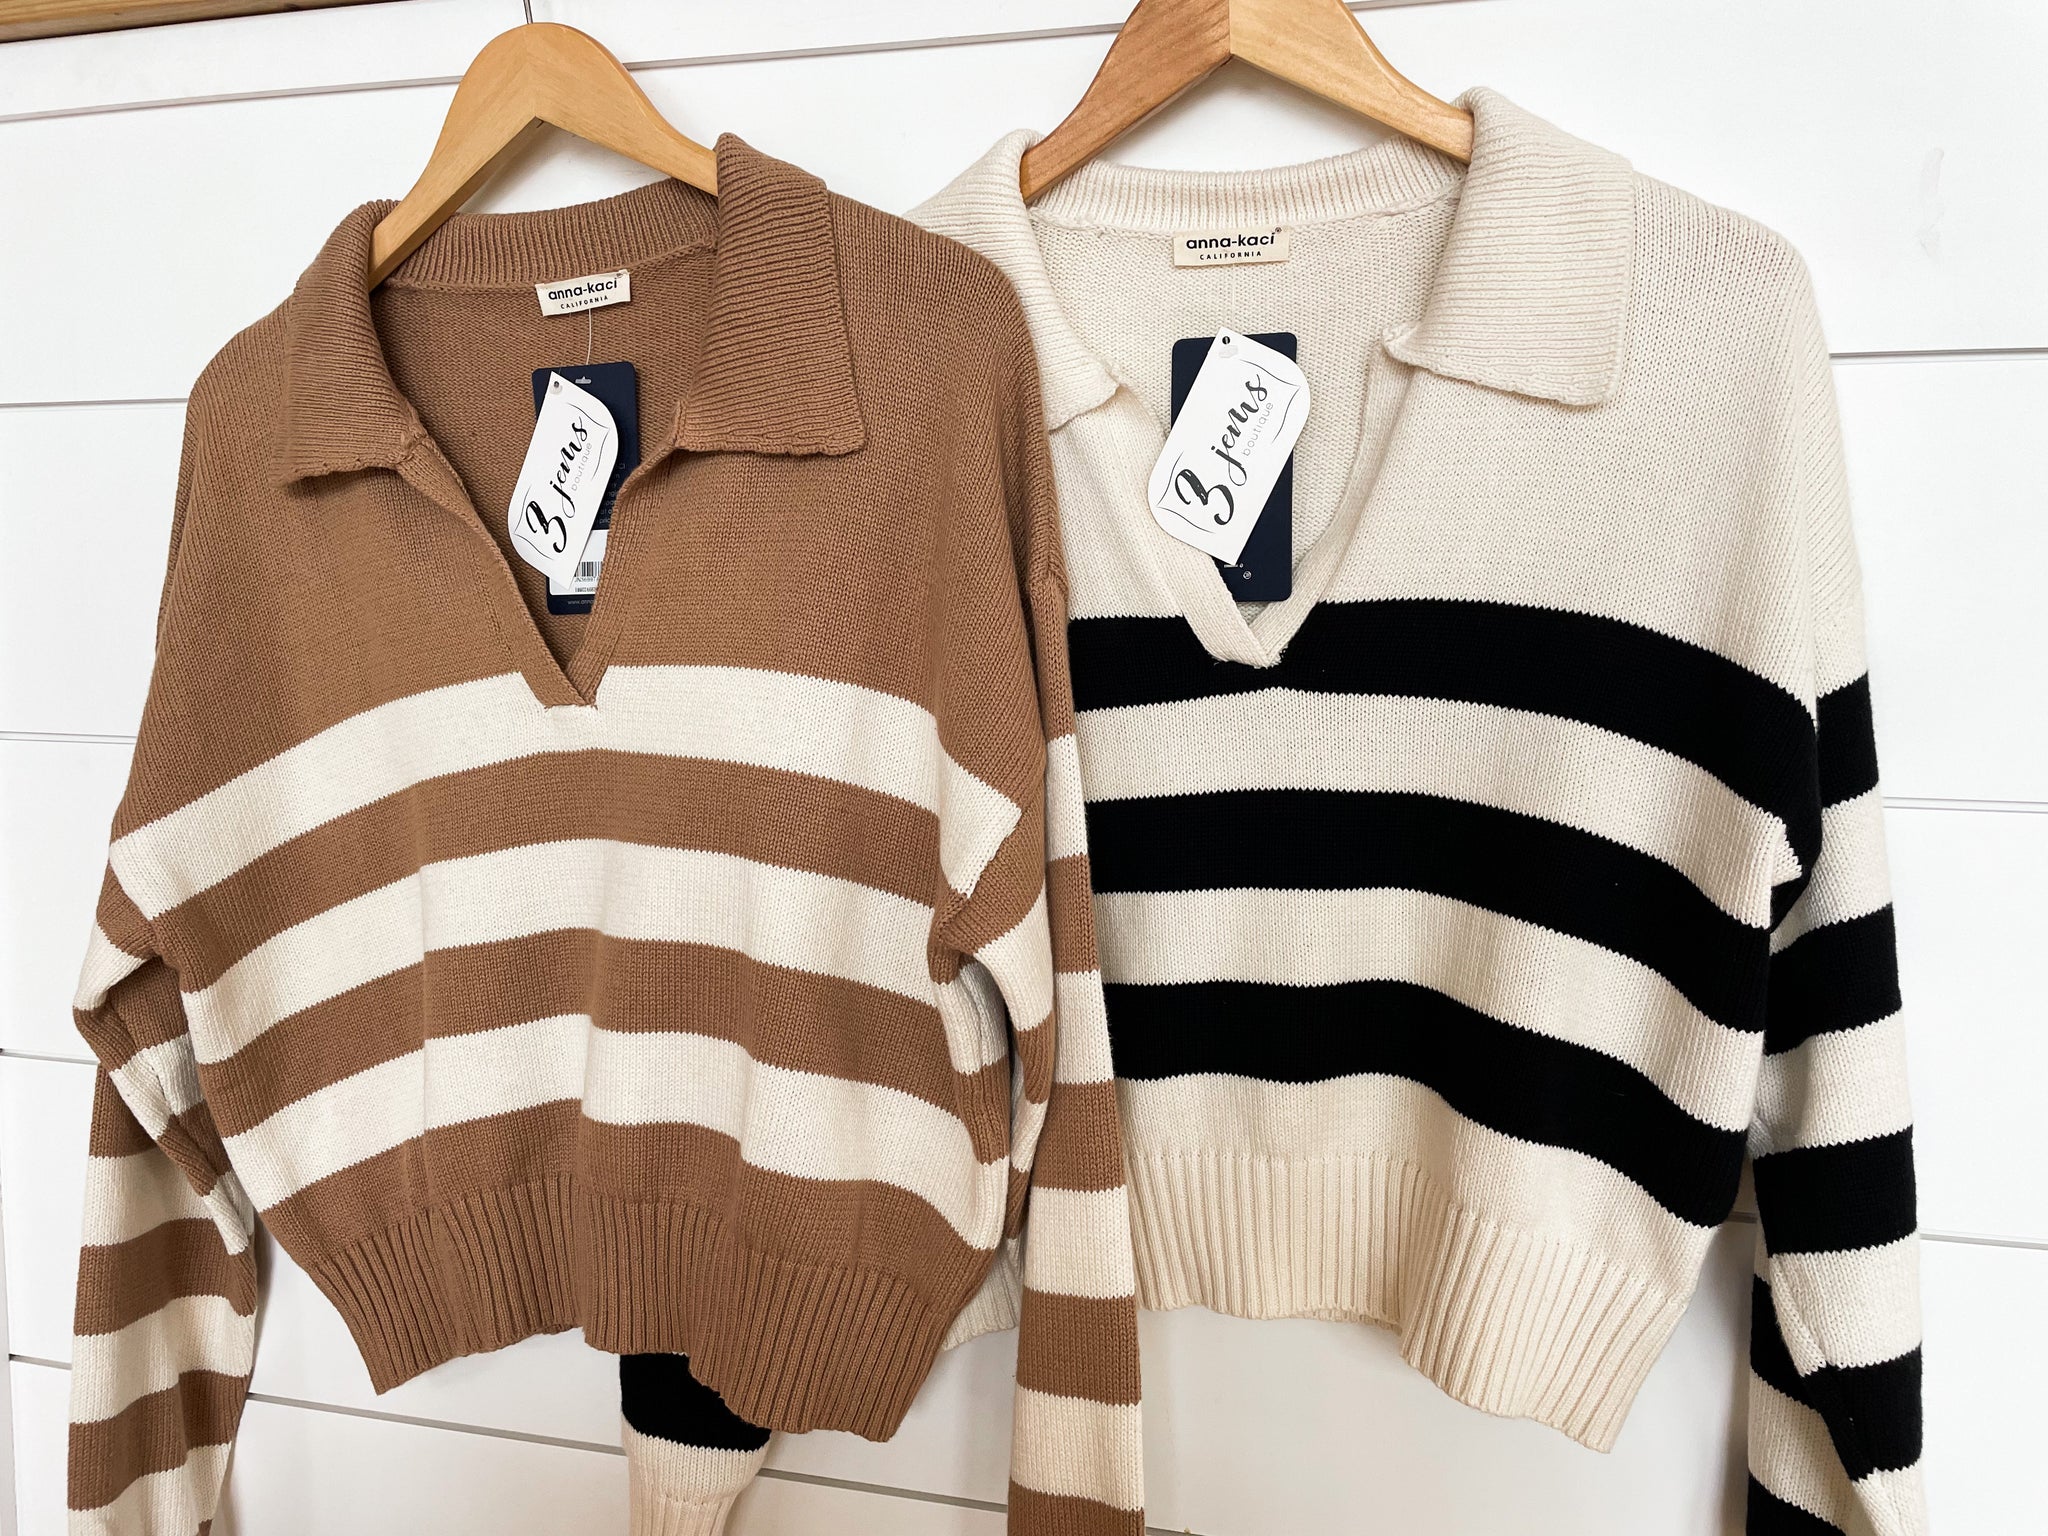 Thick Striped Collared Sweater